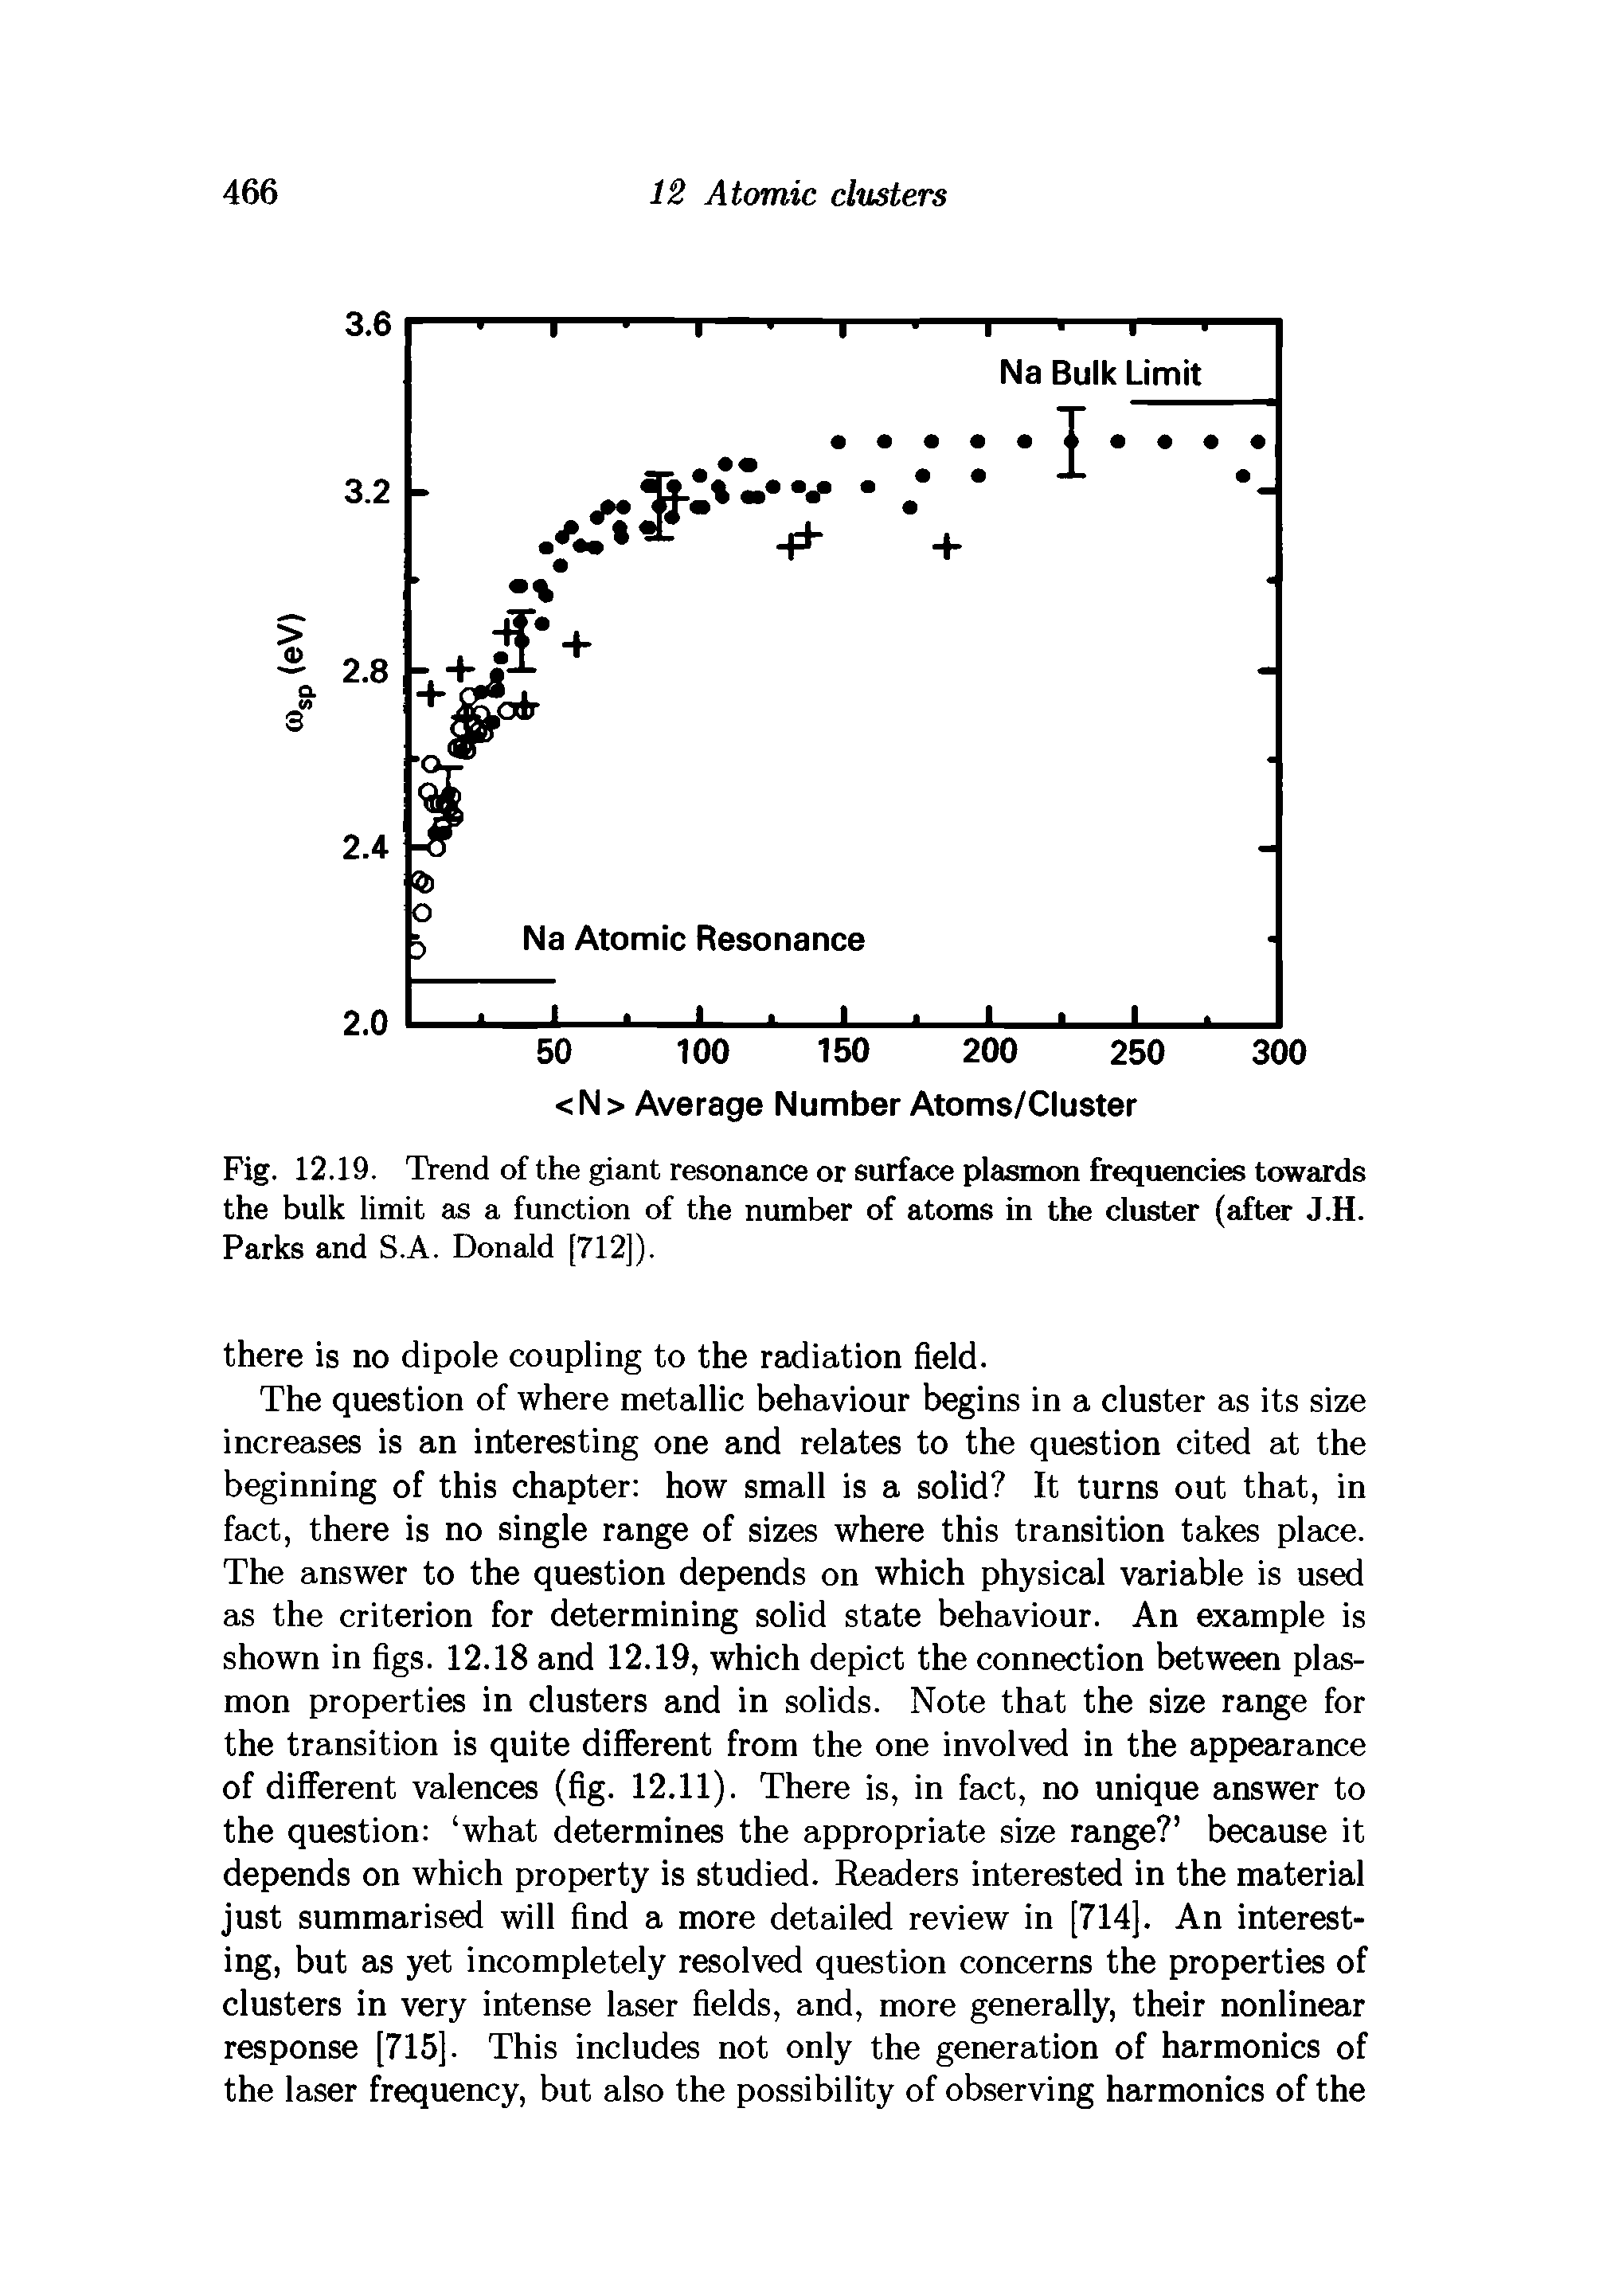 Fig. 12.19. Trend of the giant resonance or surface plasmon frequencies towards the bulk limit as a function of the number of atoms in the cluster (after J.H. Parks and S.A. Donald [712]).